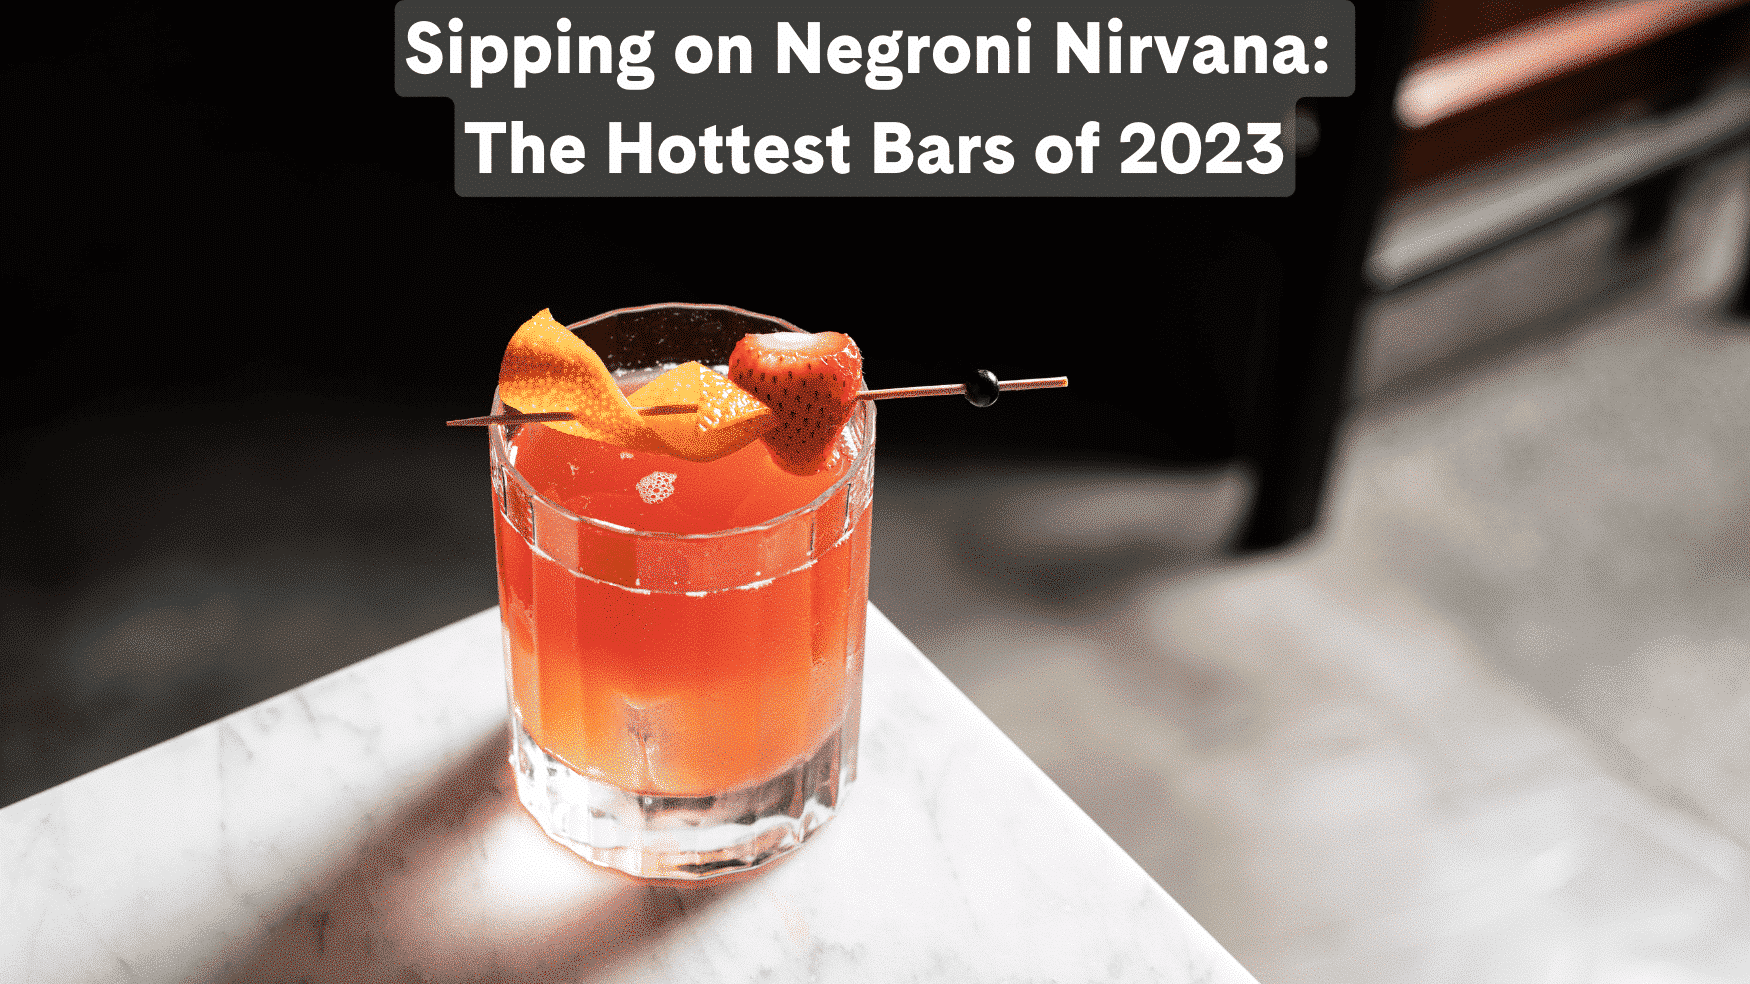 Sipping on Negroni Nirvana: The Hottest Bars of 2023